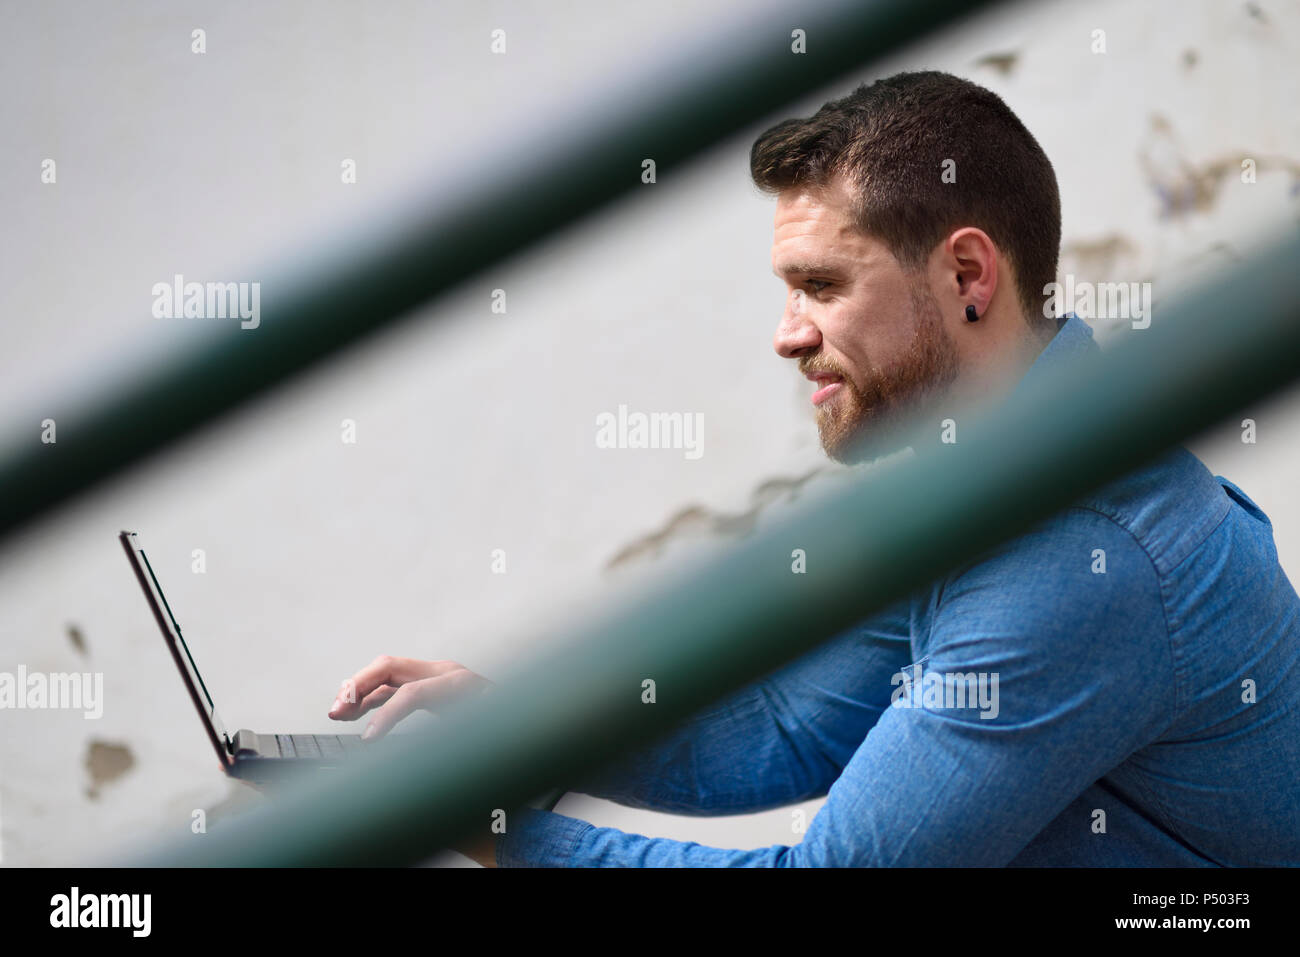 Young man sitting on stairs, working, using laptop Stock Photo